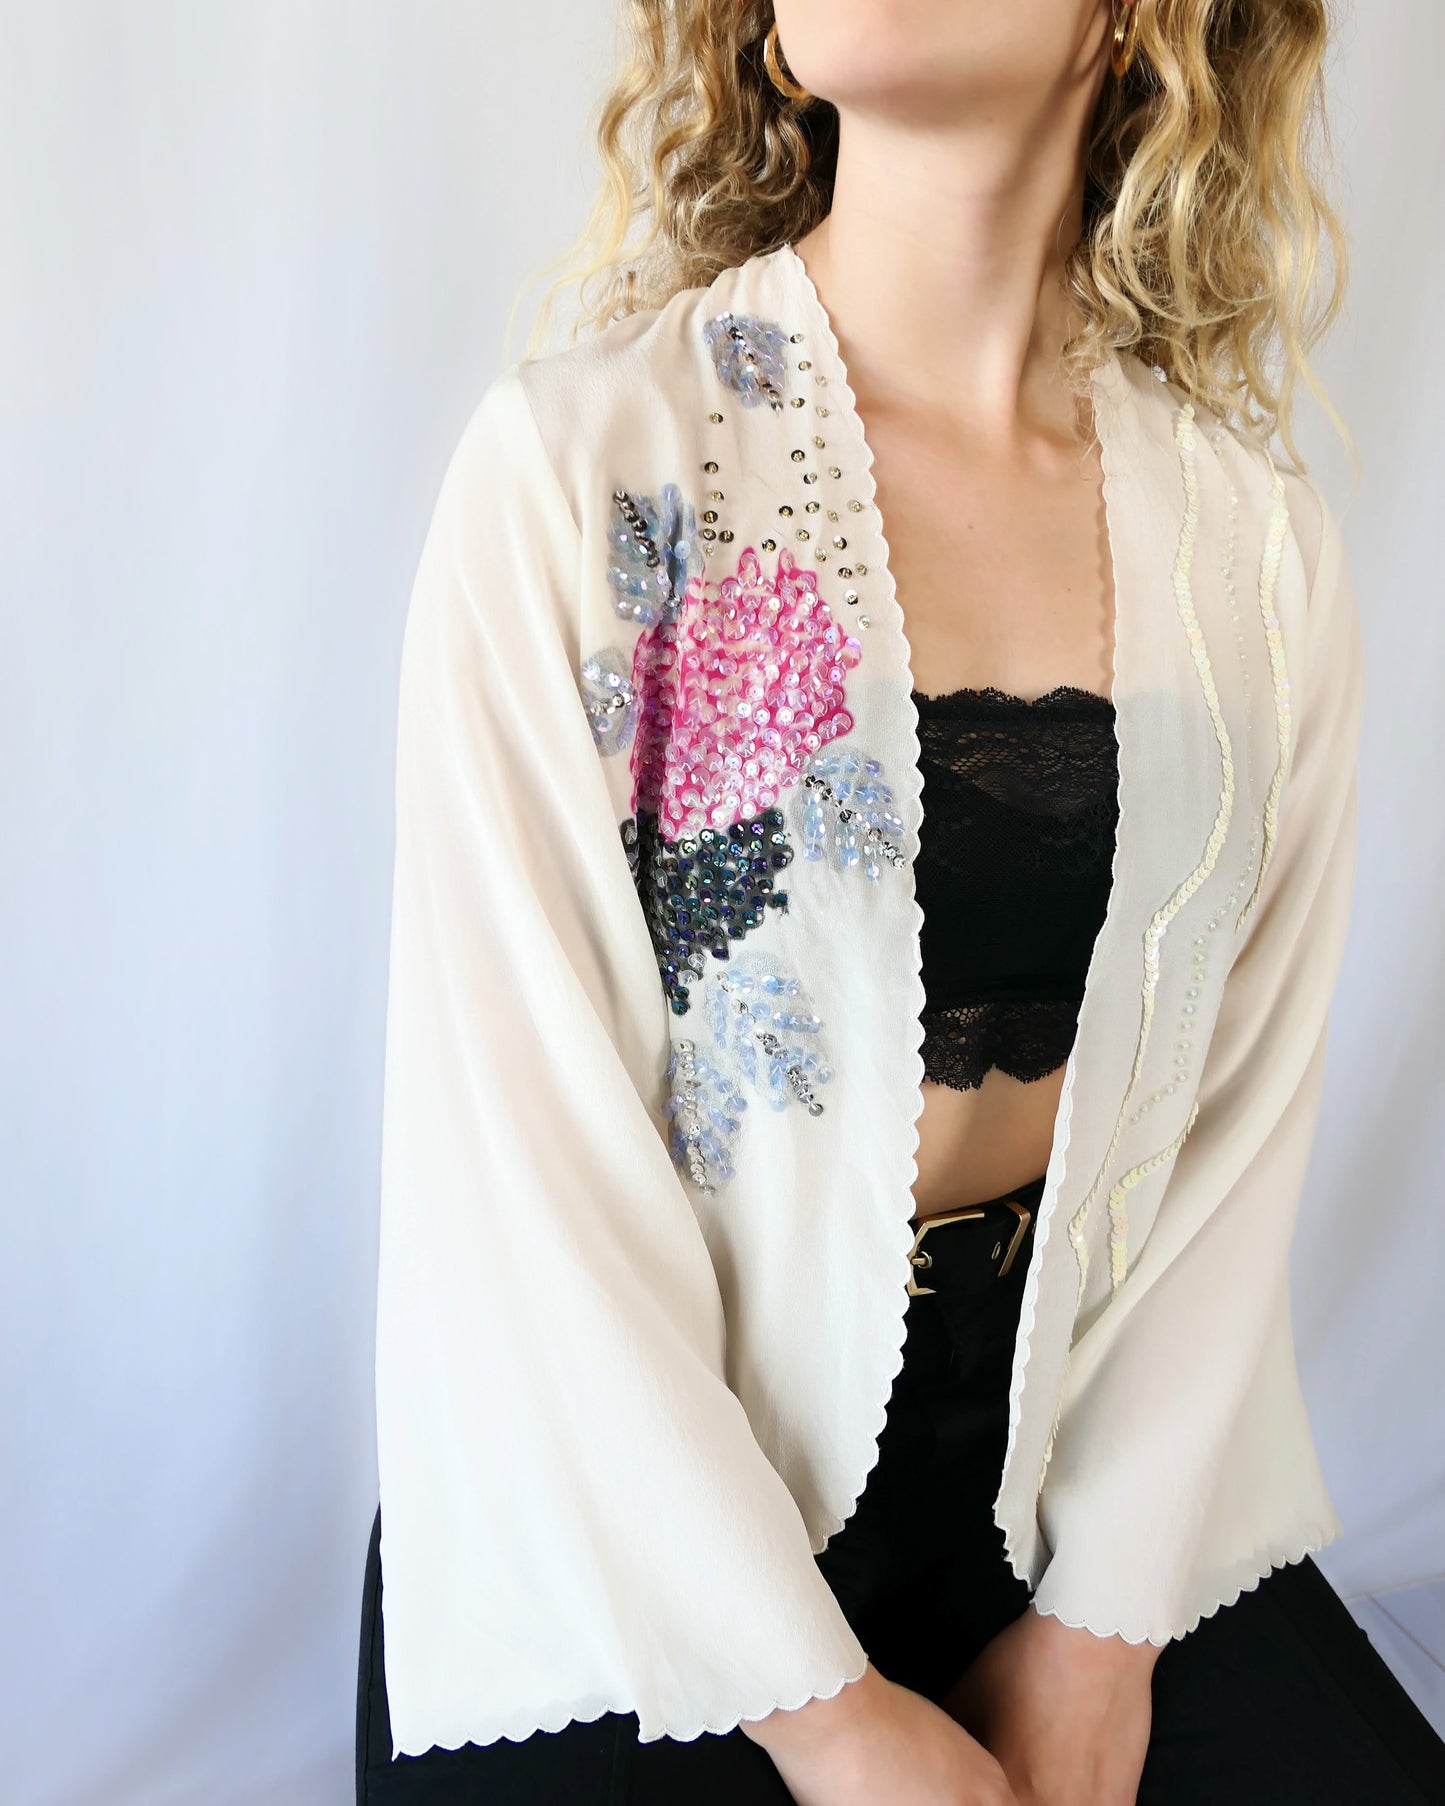 From Lim's Vintage: An elegant hand painted silk kimono top that drapes over effortlessly, with a relaxed fit and elegent scalloped edging along the borders and sleeve hem. Hand painted pink peony flowers and muted lavender grey and black foliage are adorned with iridescent and silver sequins. One size fits most. Size: One Size Measurements: Bust 42” Waist 41" Length 24” Shoulder width 15” Sleeve 20.5” Color: Ivory Material: 100% silk with plastic sequins